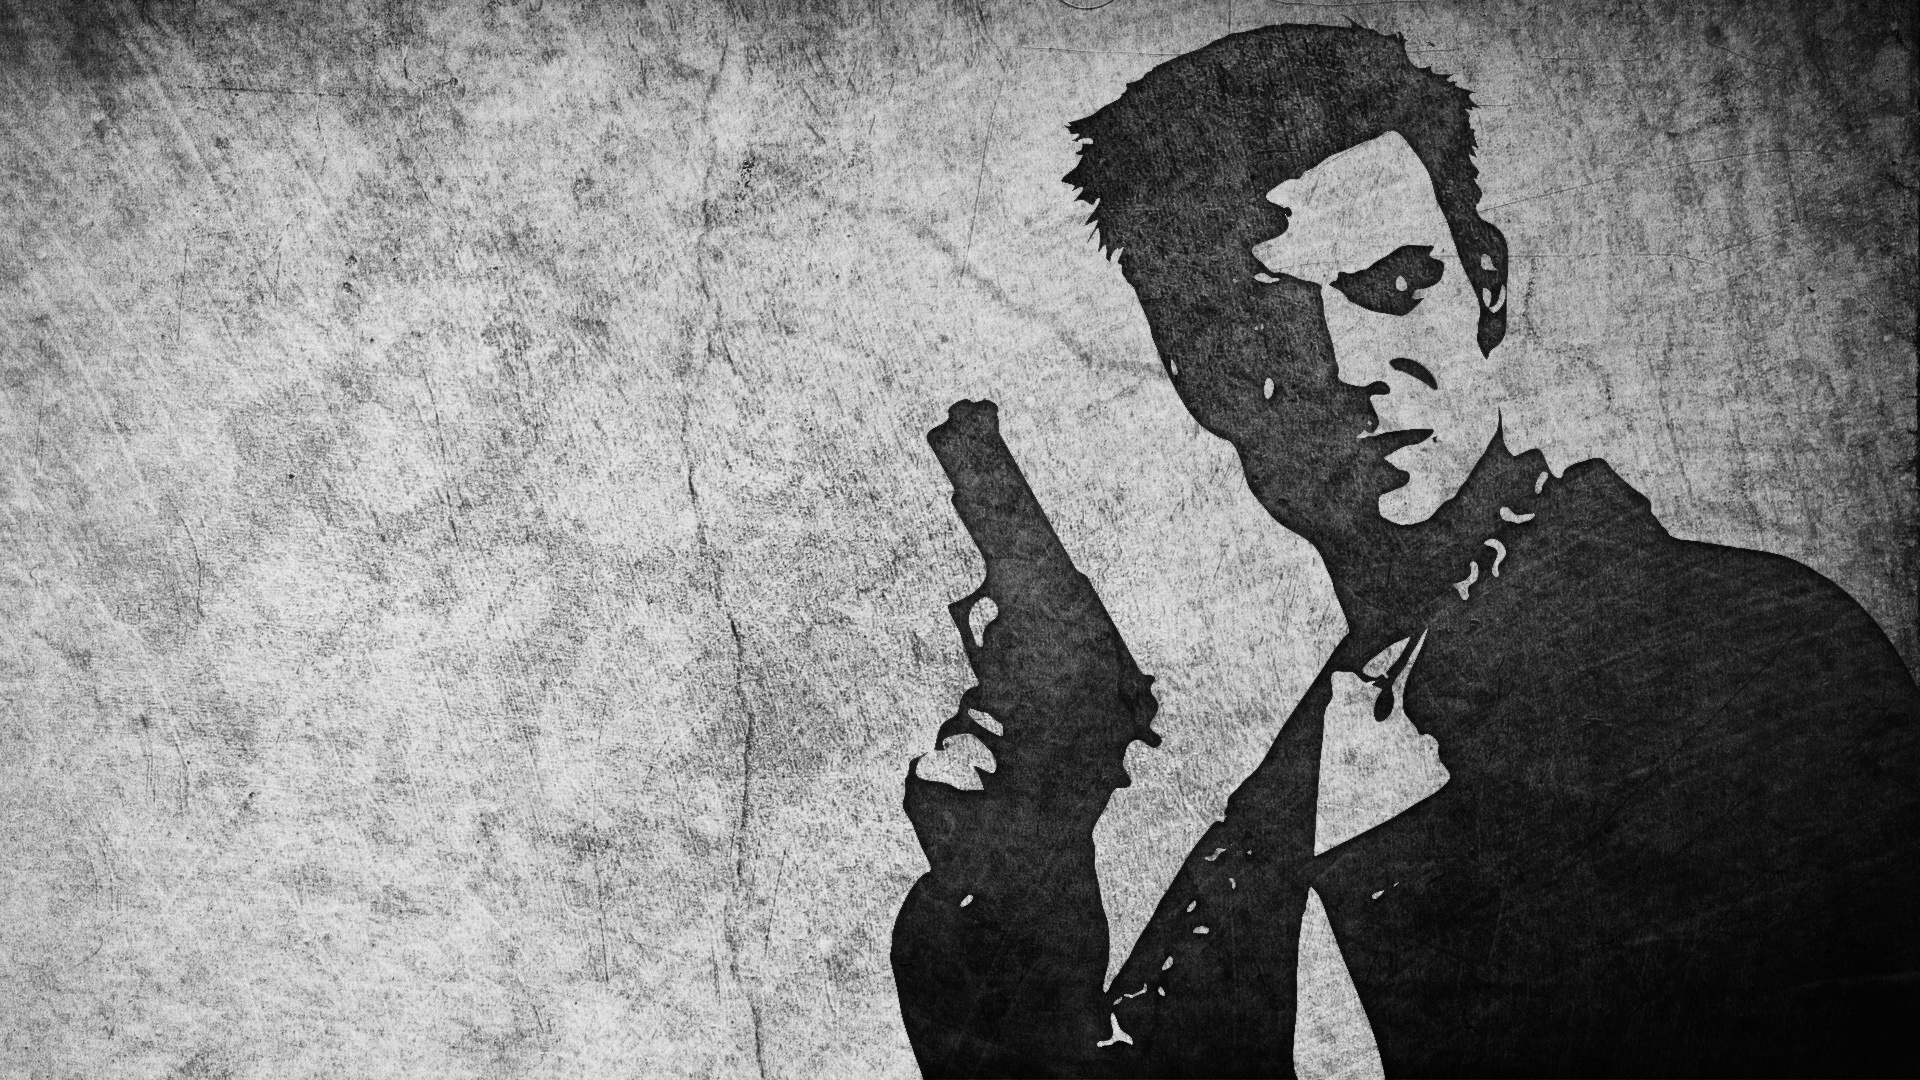 Max Payne Wallpaper by hexarrow on